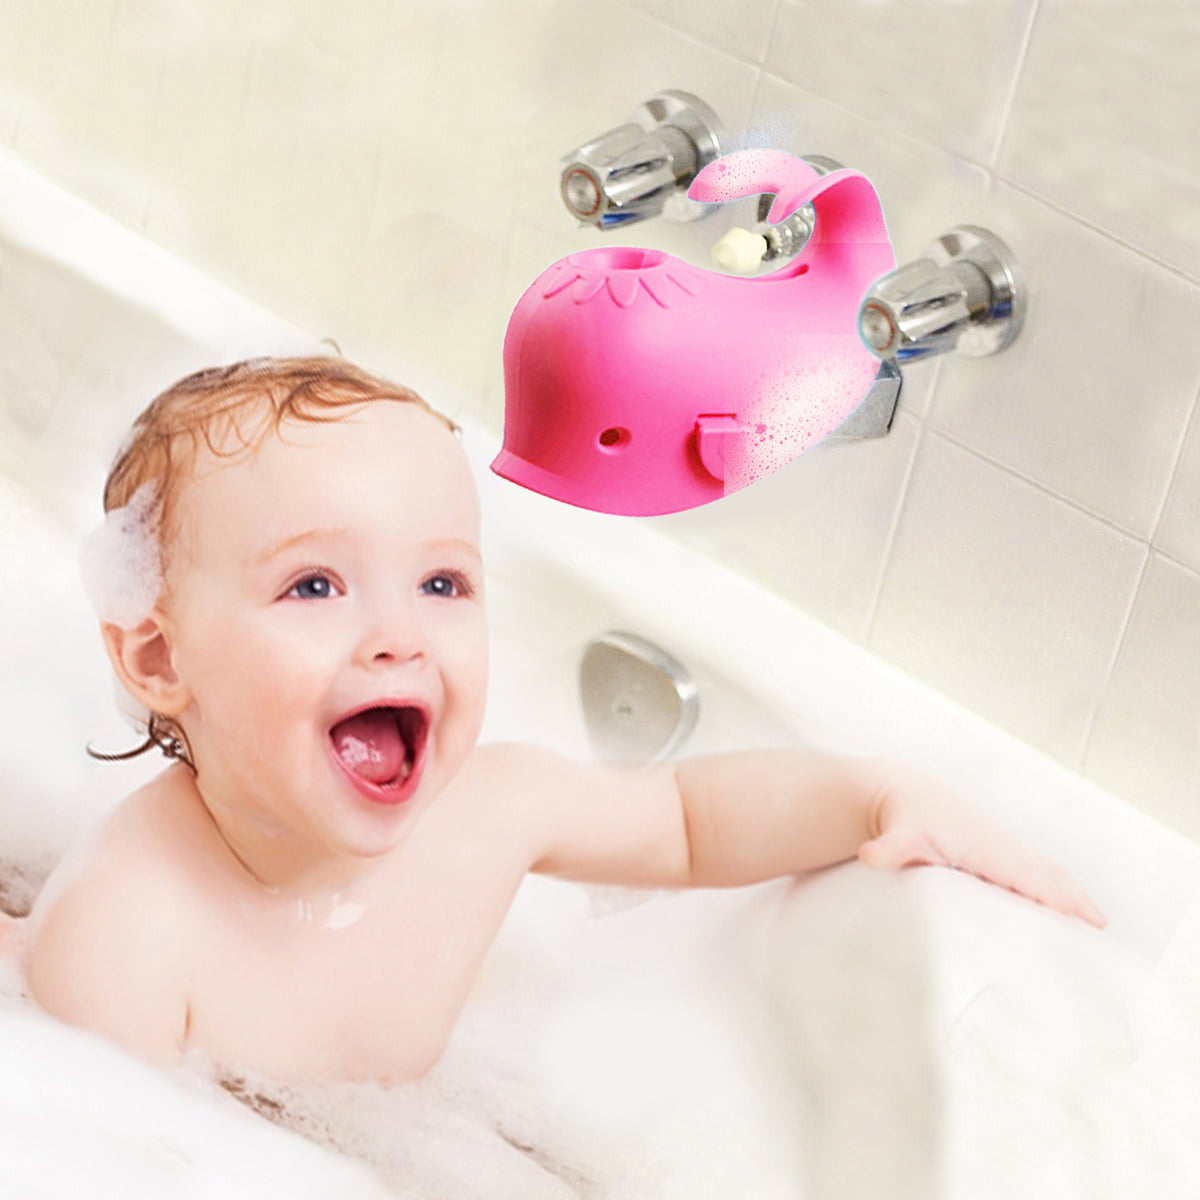 Baby Care Bath Tap Tub Safety Water Faucet Cover Protector Bathing Accessory 